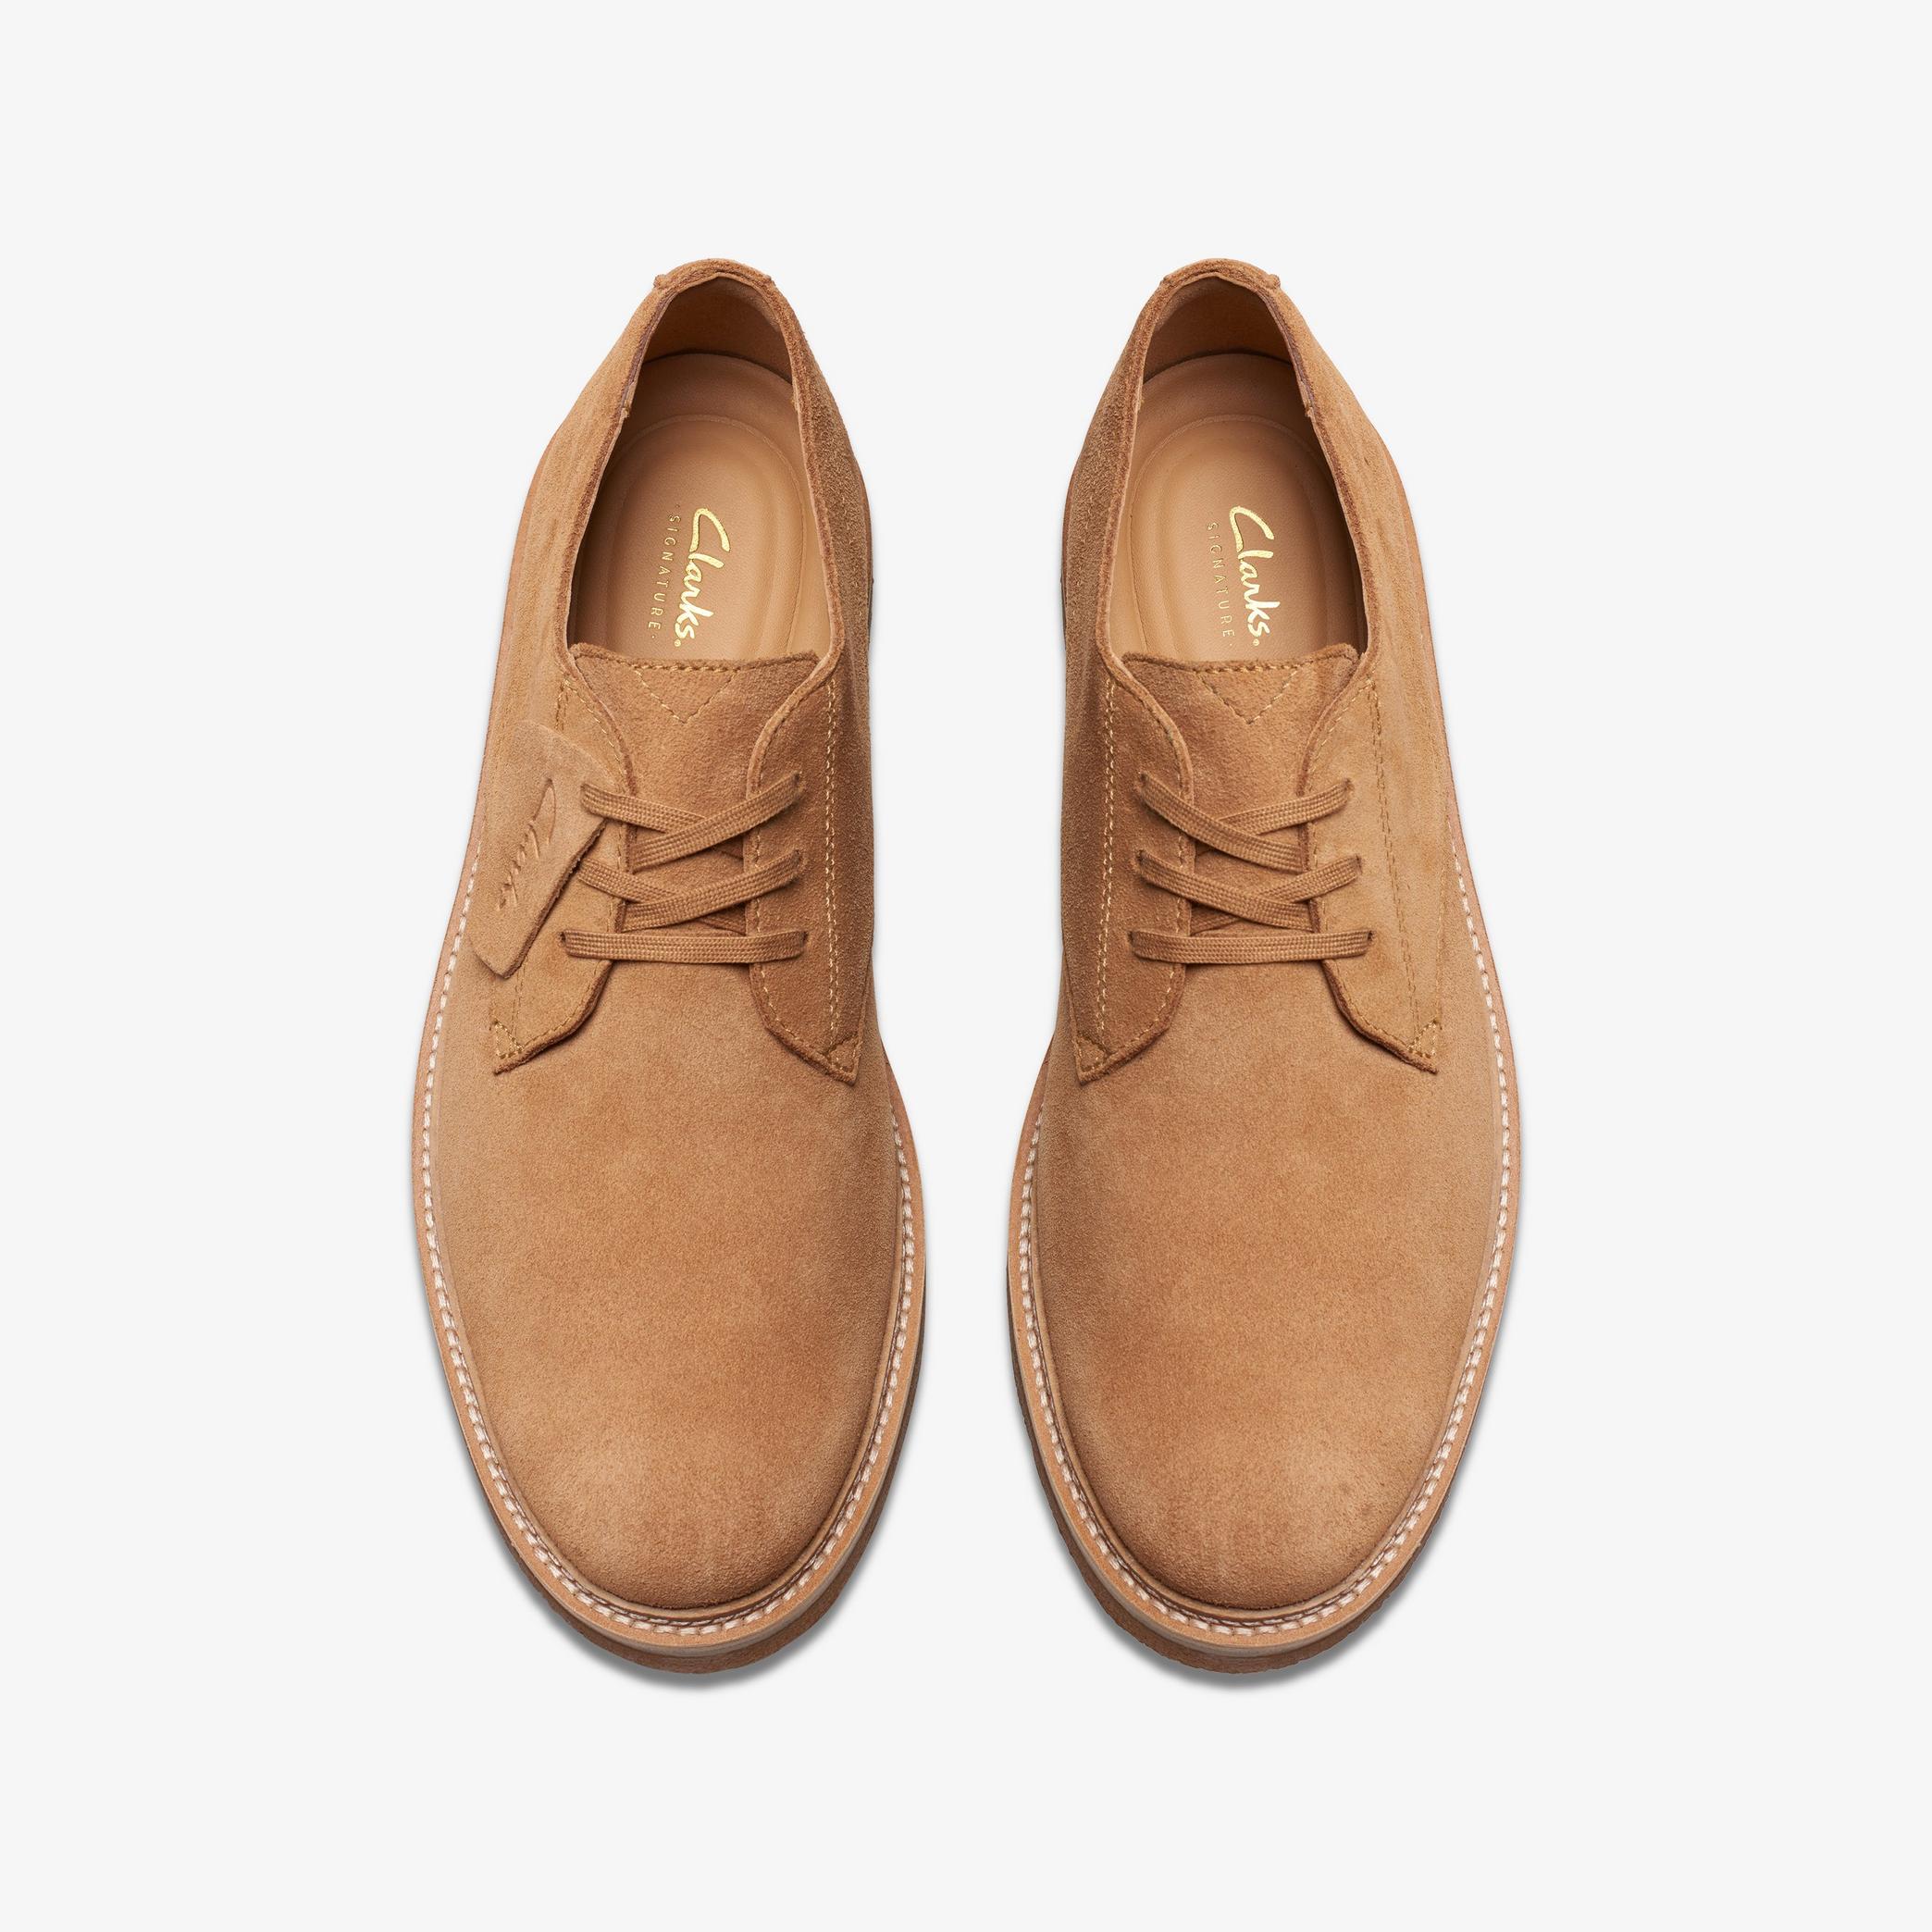 Clarkdale Derby Light Tan Suede Oxford Shoes, view 6 of 6